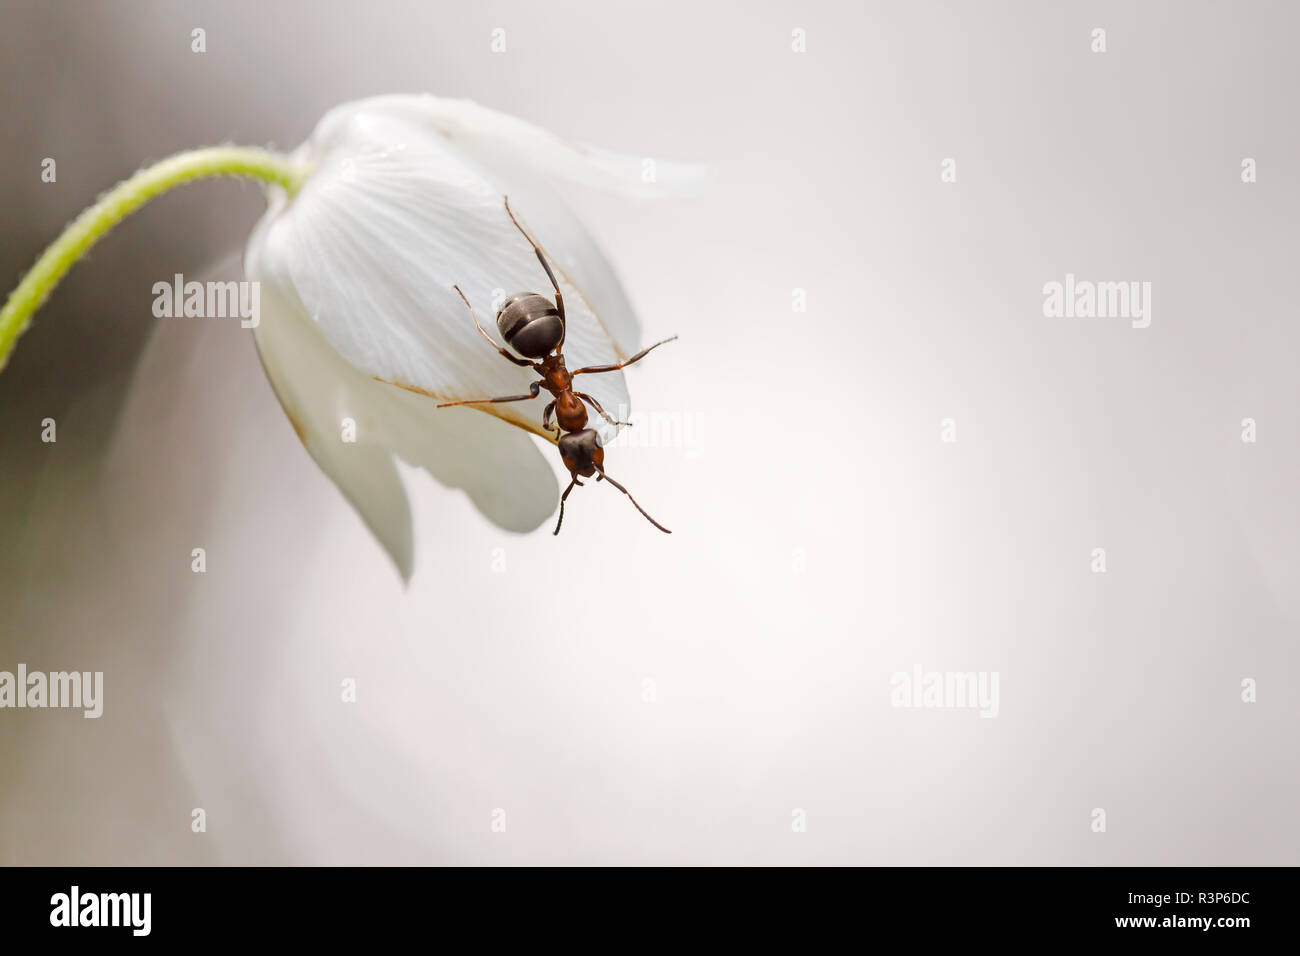 Red wood ant (Formica rufa) on a flower against light, Alsace, France Stock Photo